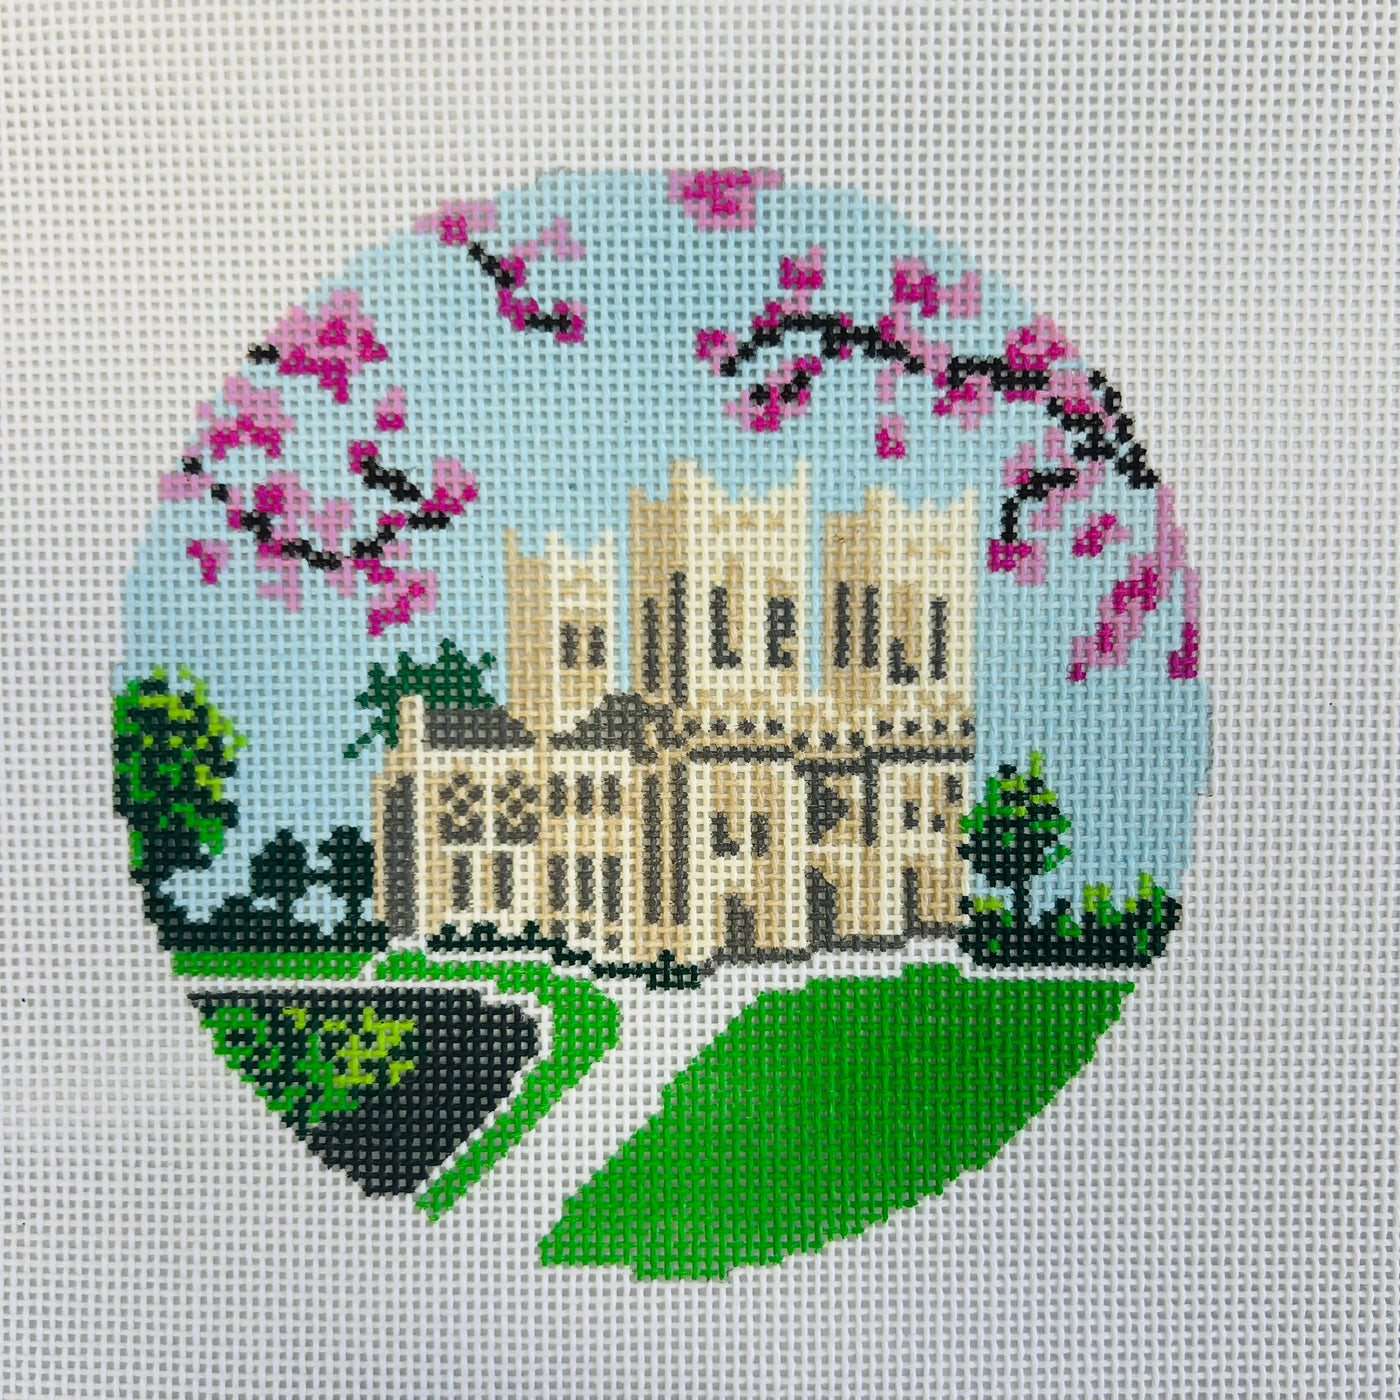 National Cathedral with Cherry Blossoms Ornament